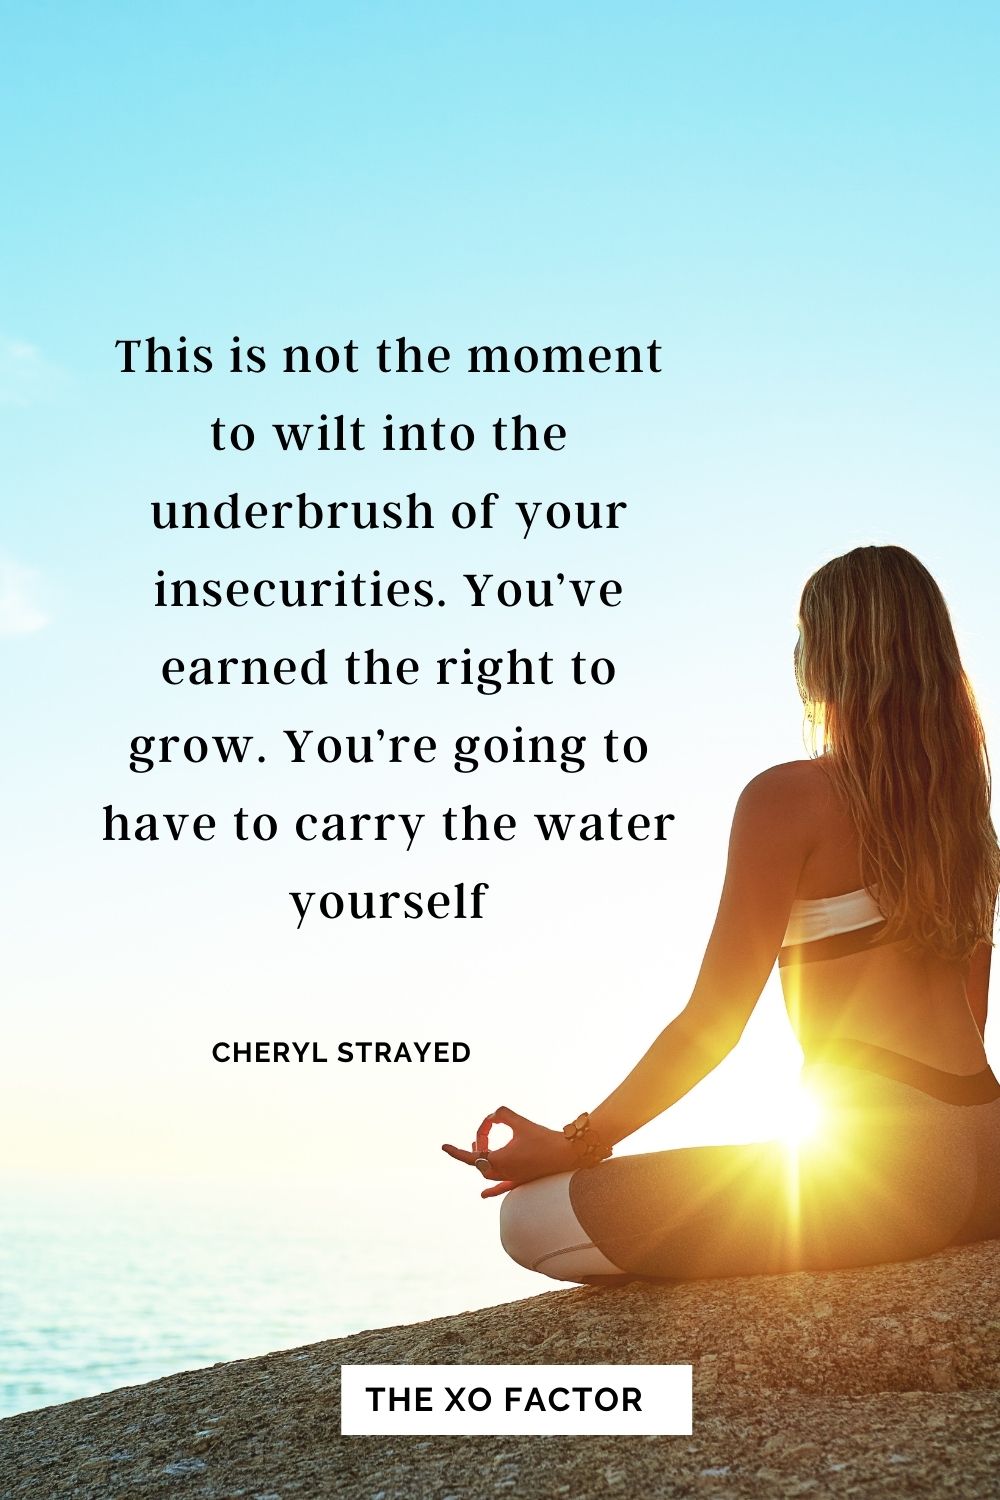 This is not the moment to wilt into the underbrush of your insecurities. You’ve earned the right to grow. You’re going to have to carry the water yourself. Cheryl Strayed